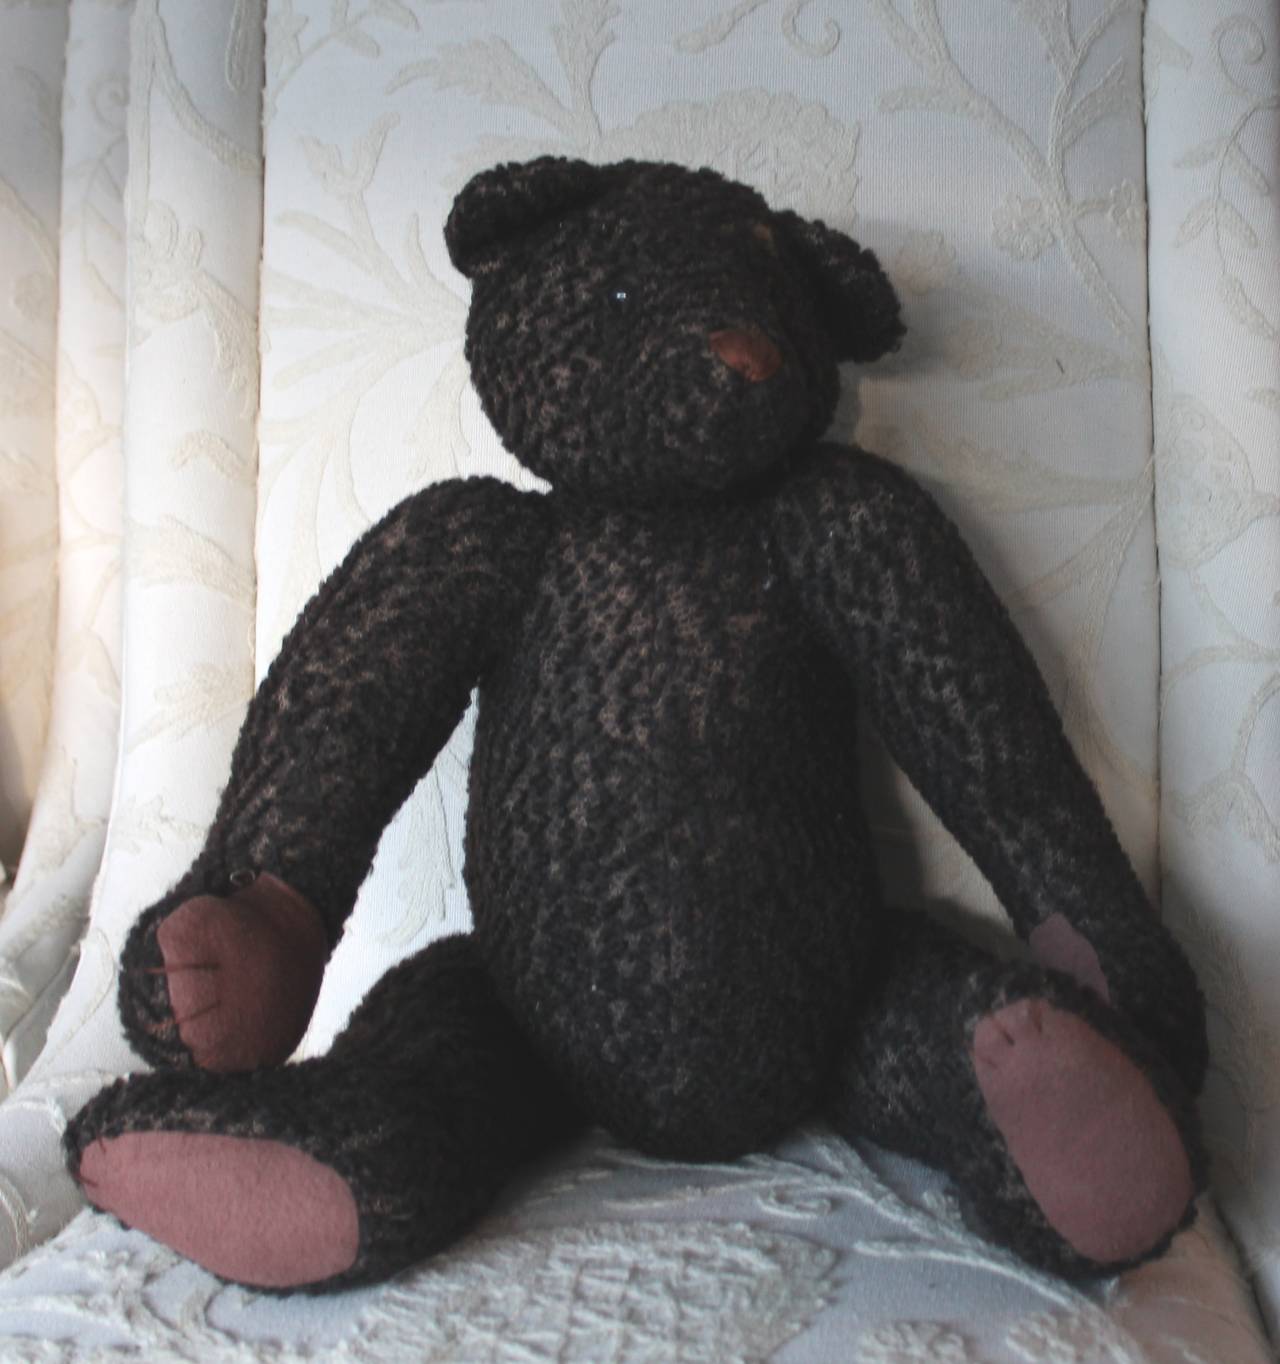 This 1930s black mohair teddy bear has glass eyes and is all movable arms, legs and head. It is most likely a Knickerbocker black bear. Just in time for the holidays! The condition is very good with wear in the expected areas.